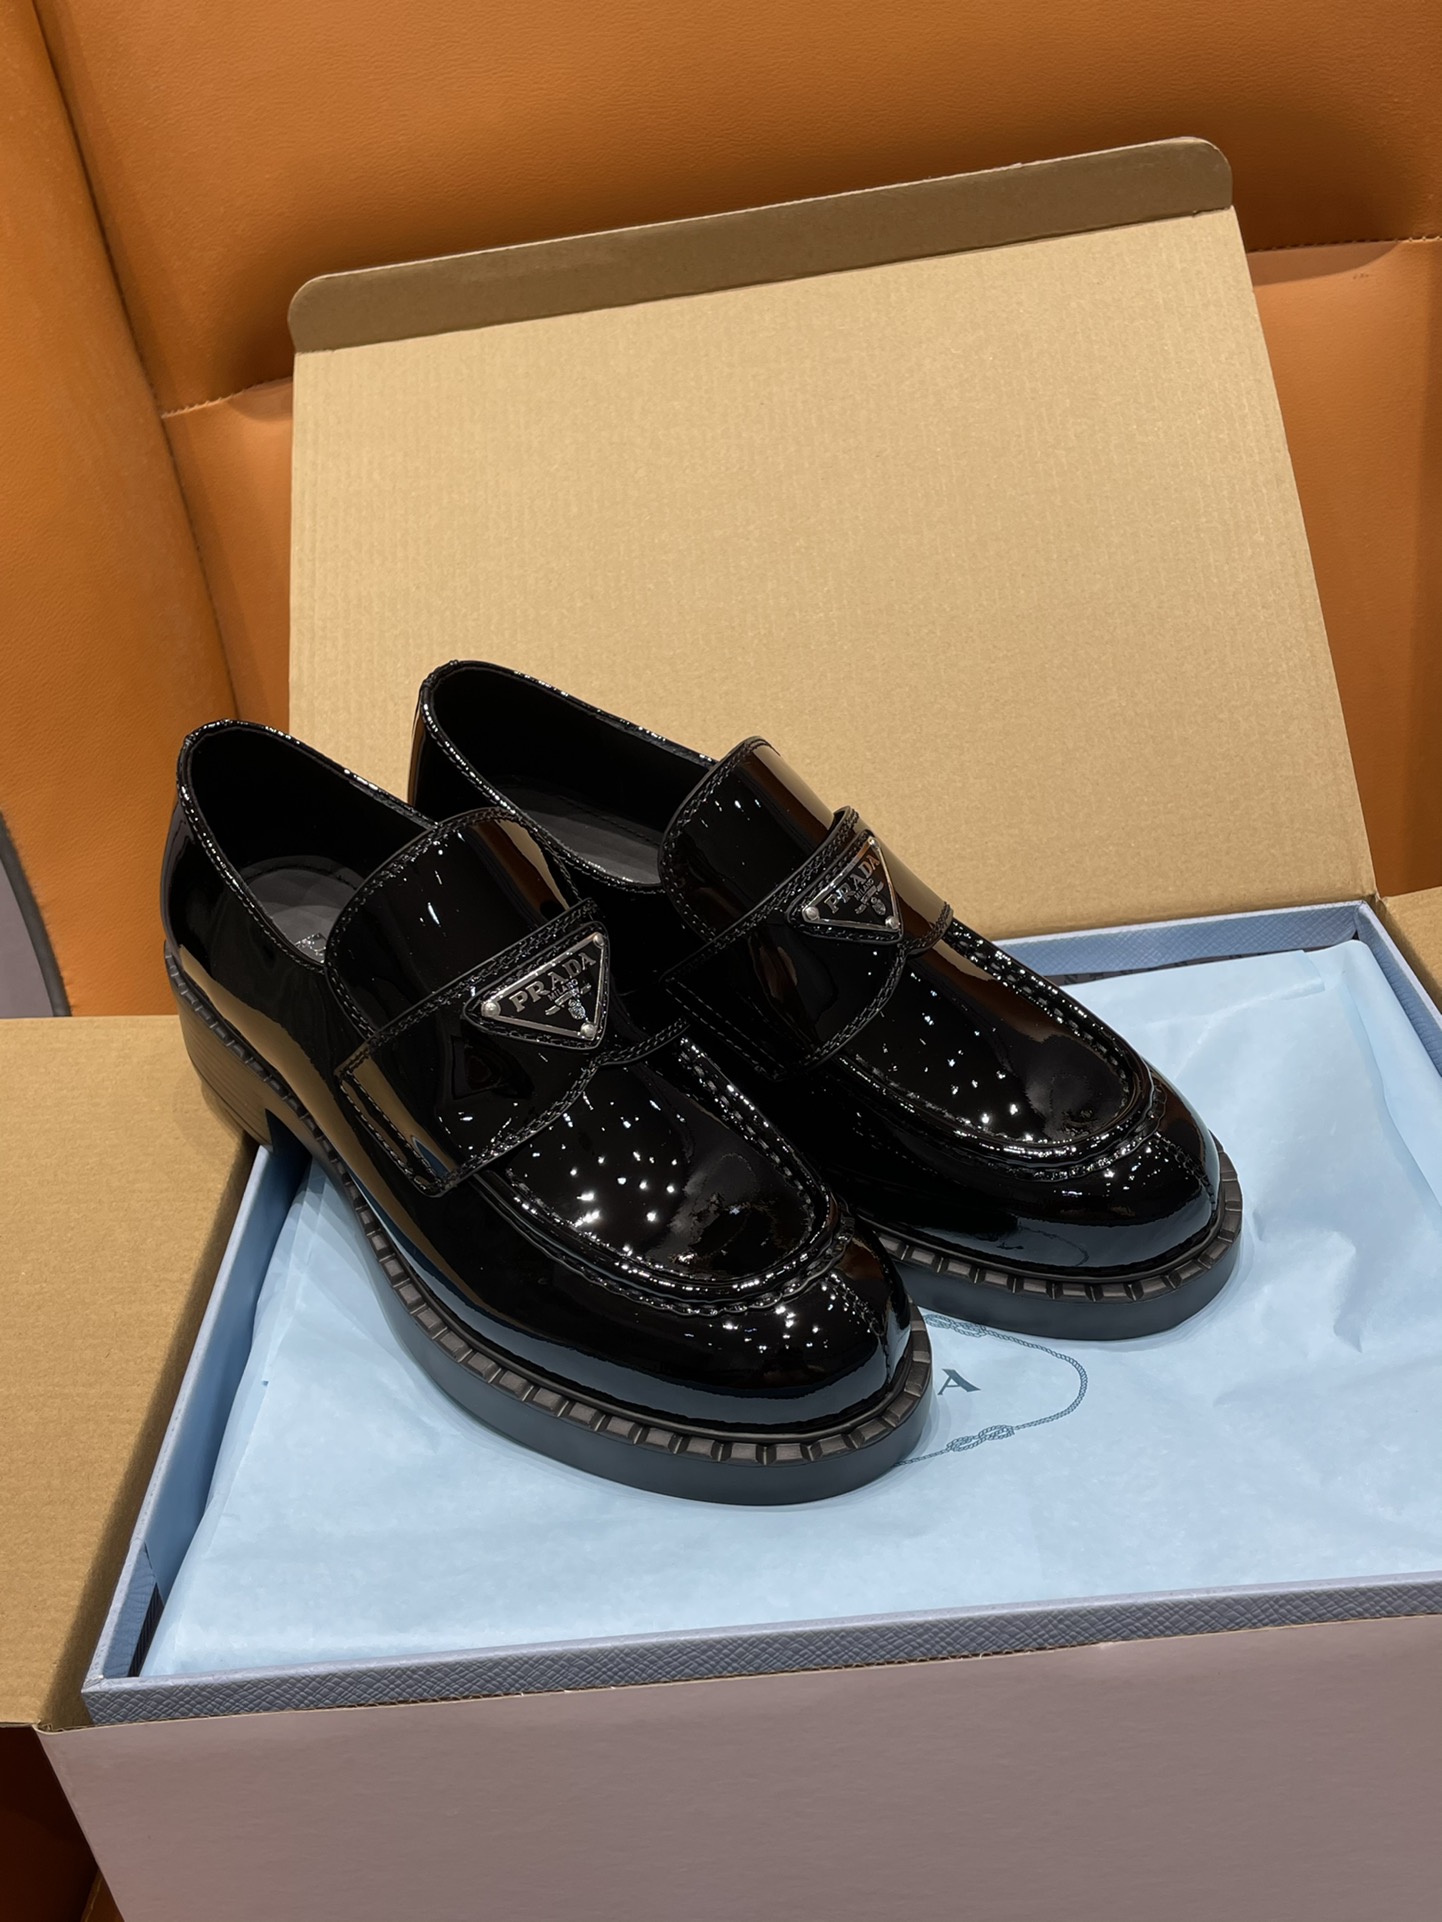 Prada Shoes Loafers Shop Now
 Cowhide Patent Leather